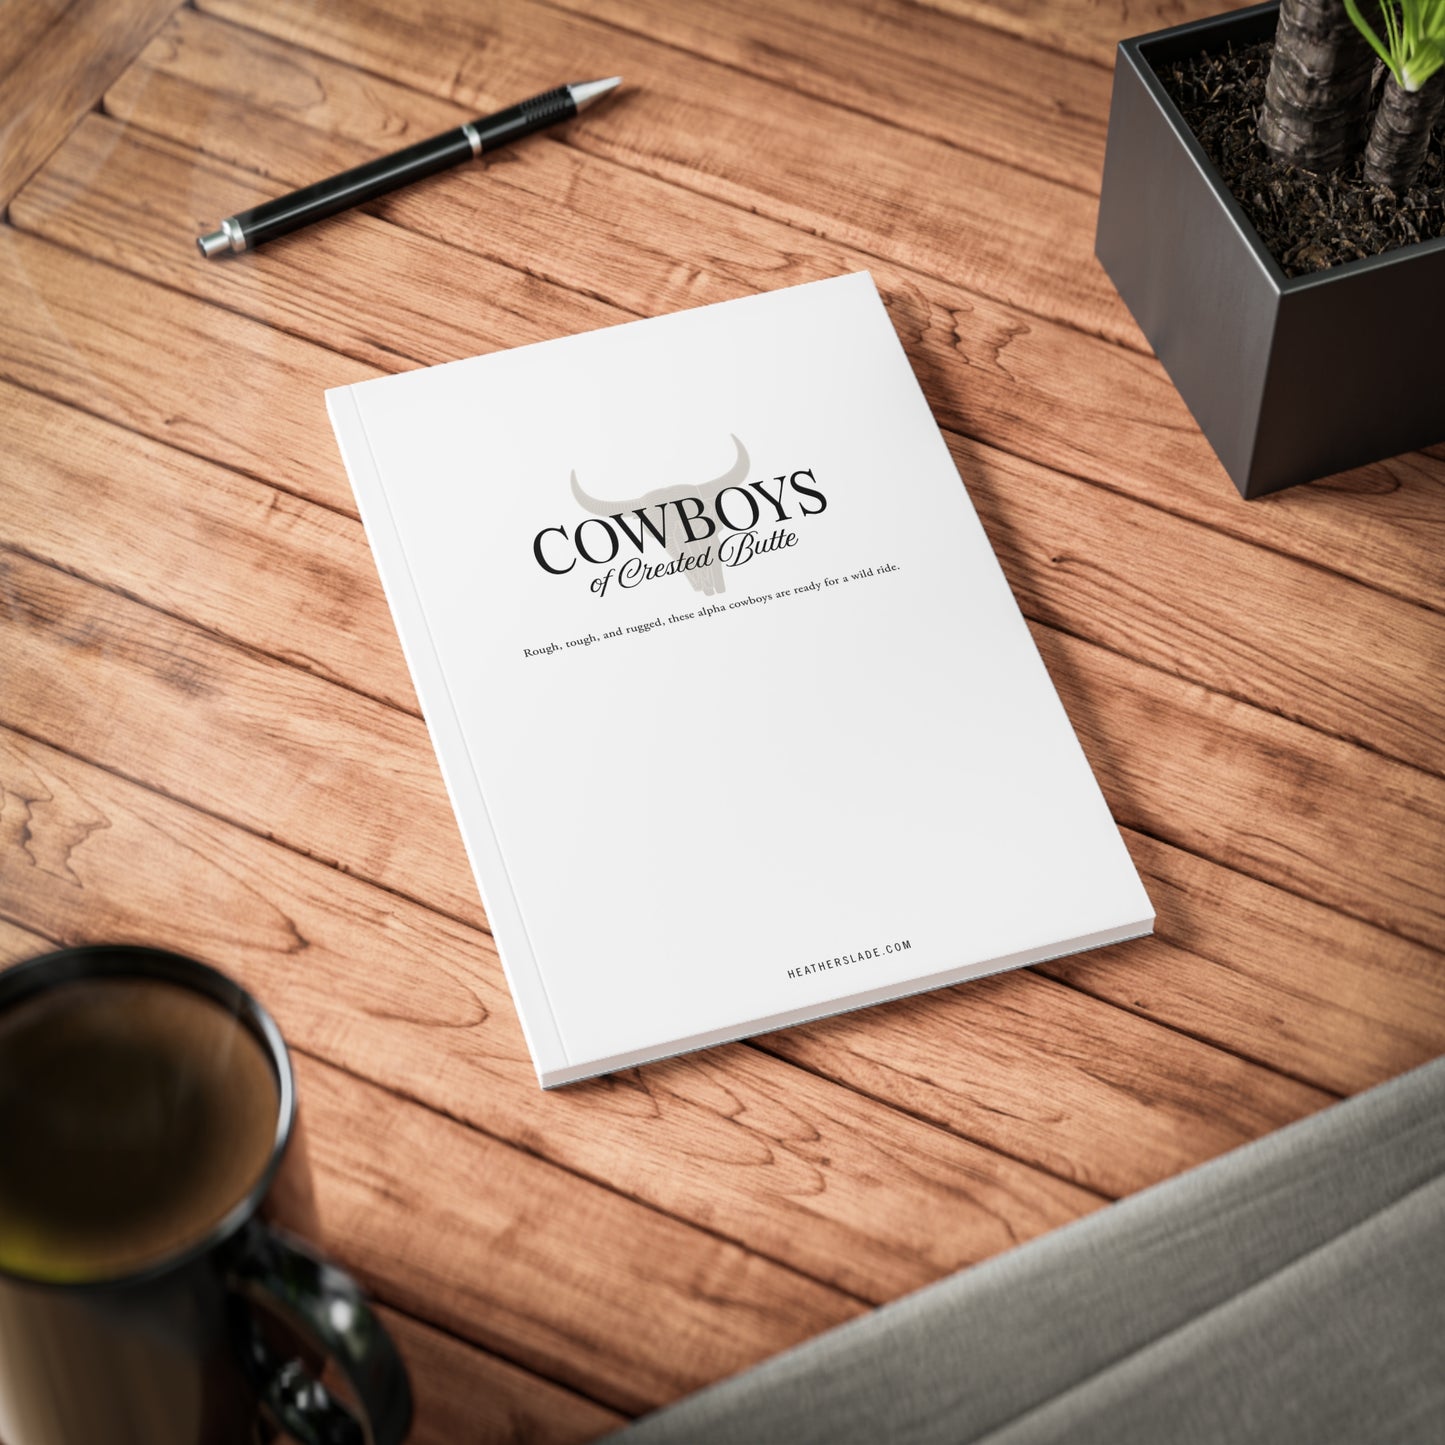 Cowboys of Crested Butte Softcover Notebook